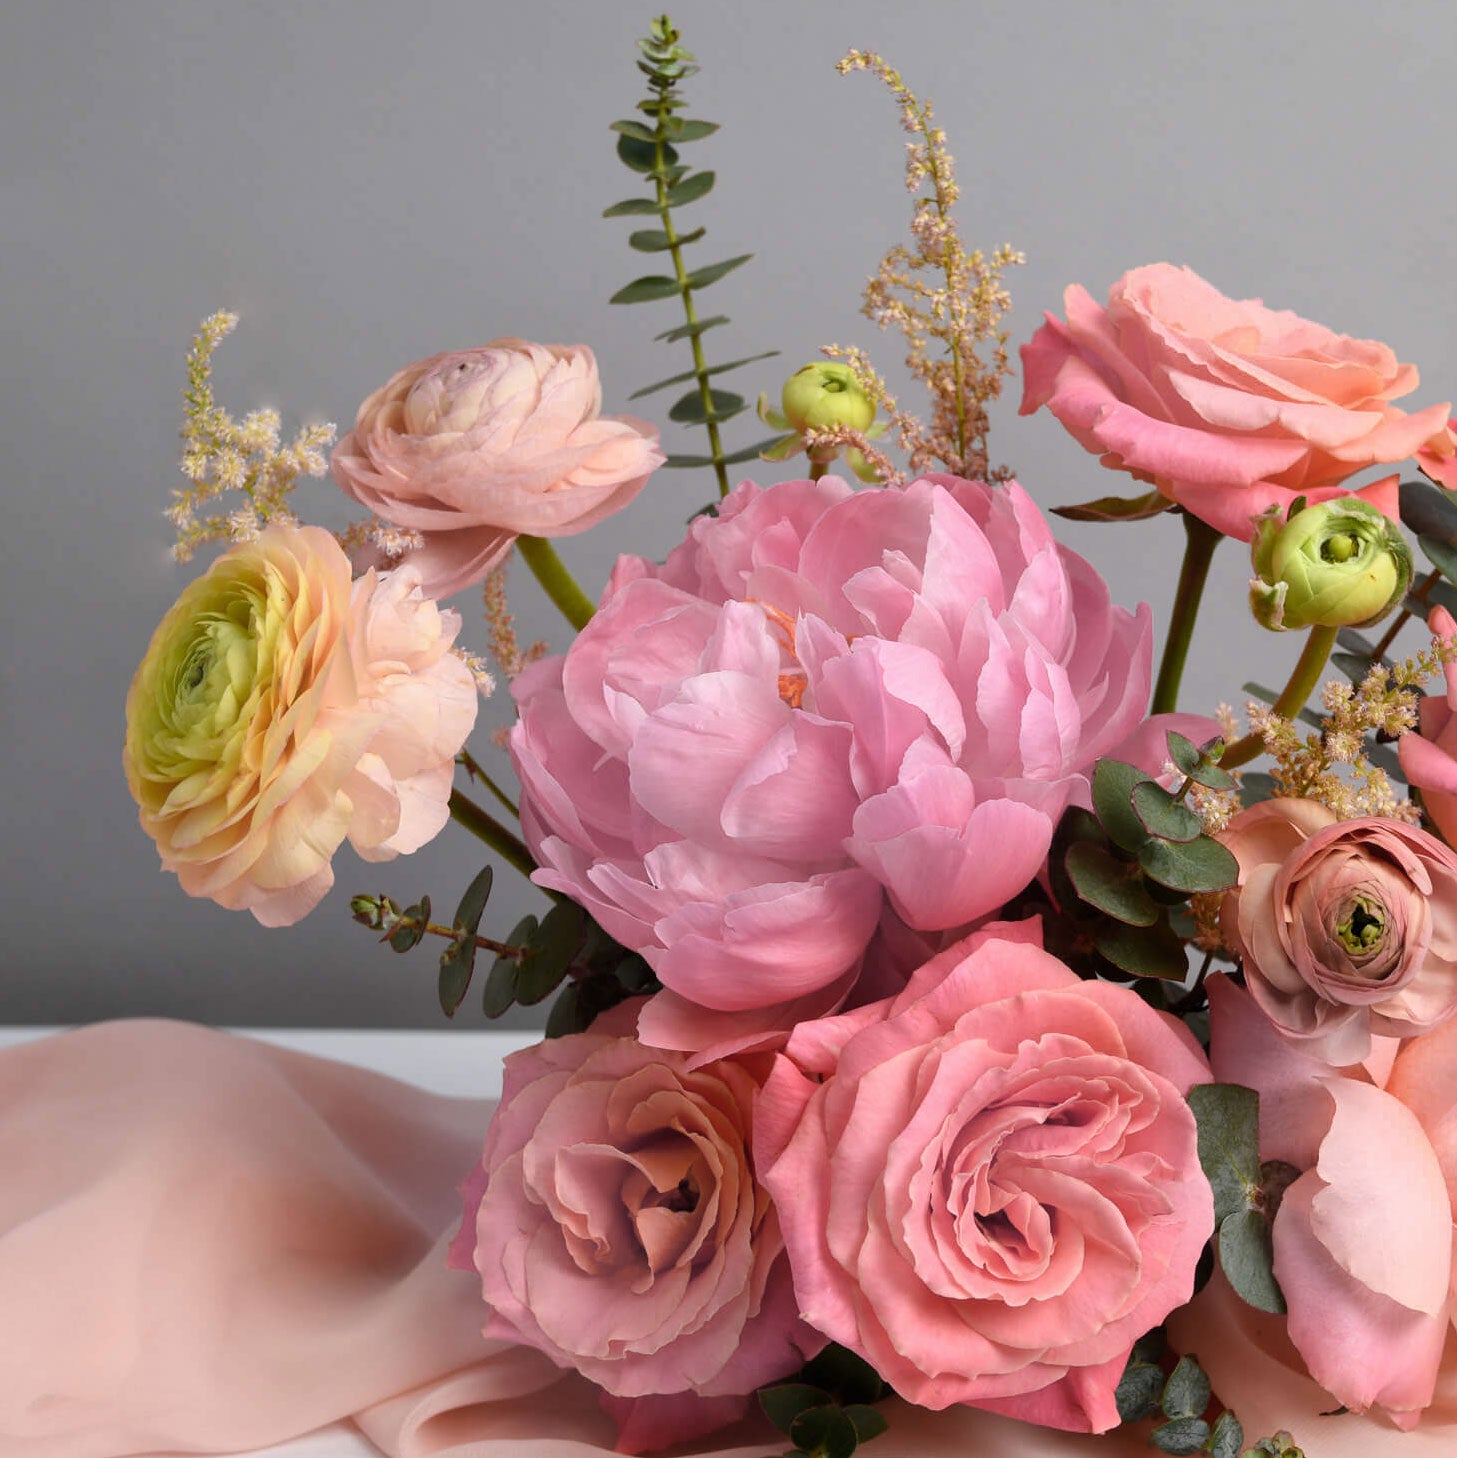 Table arrangement with peonies and roses